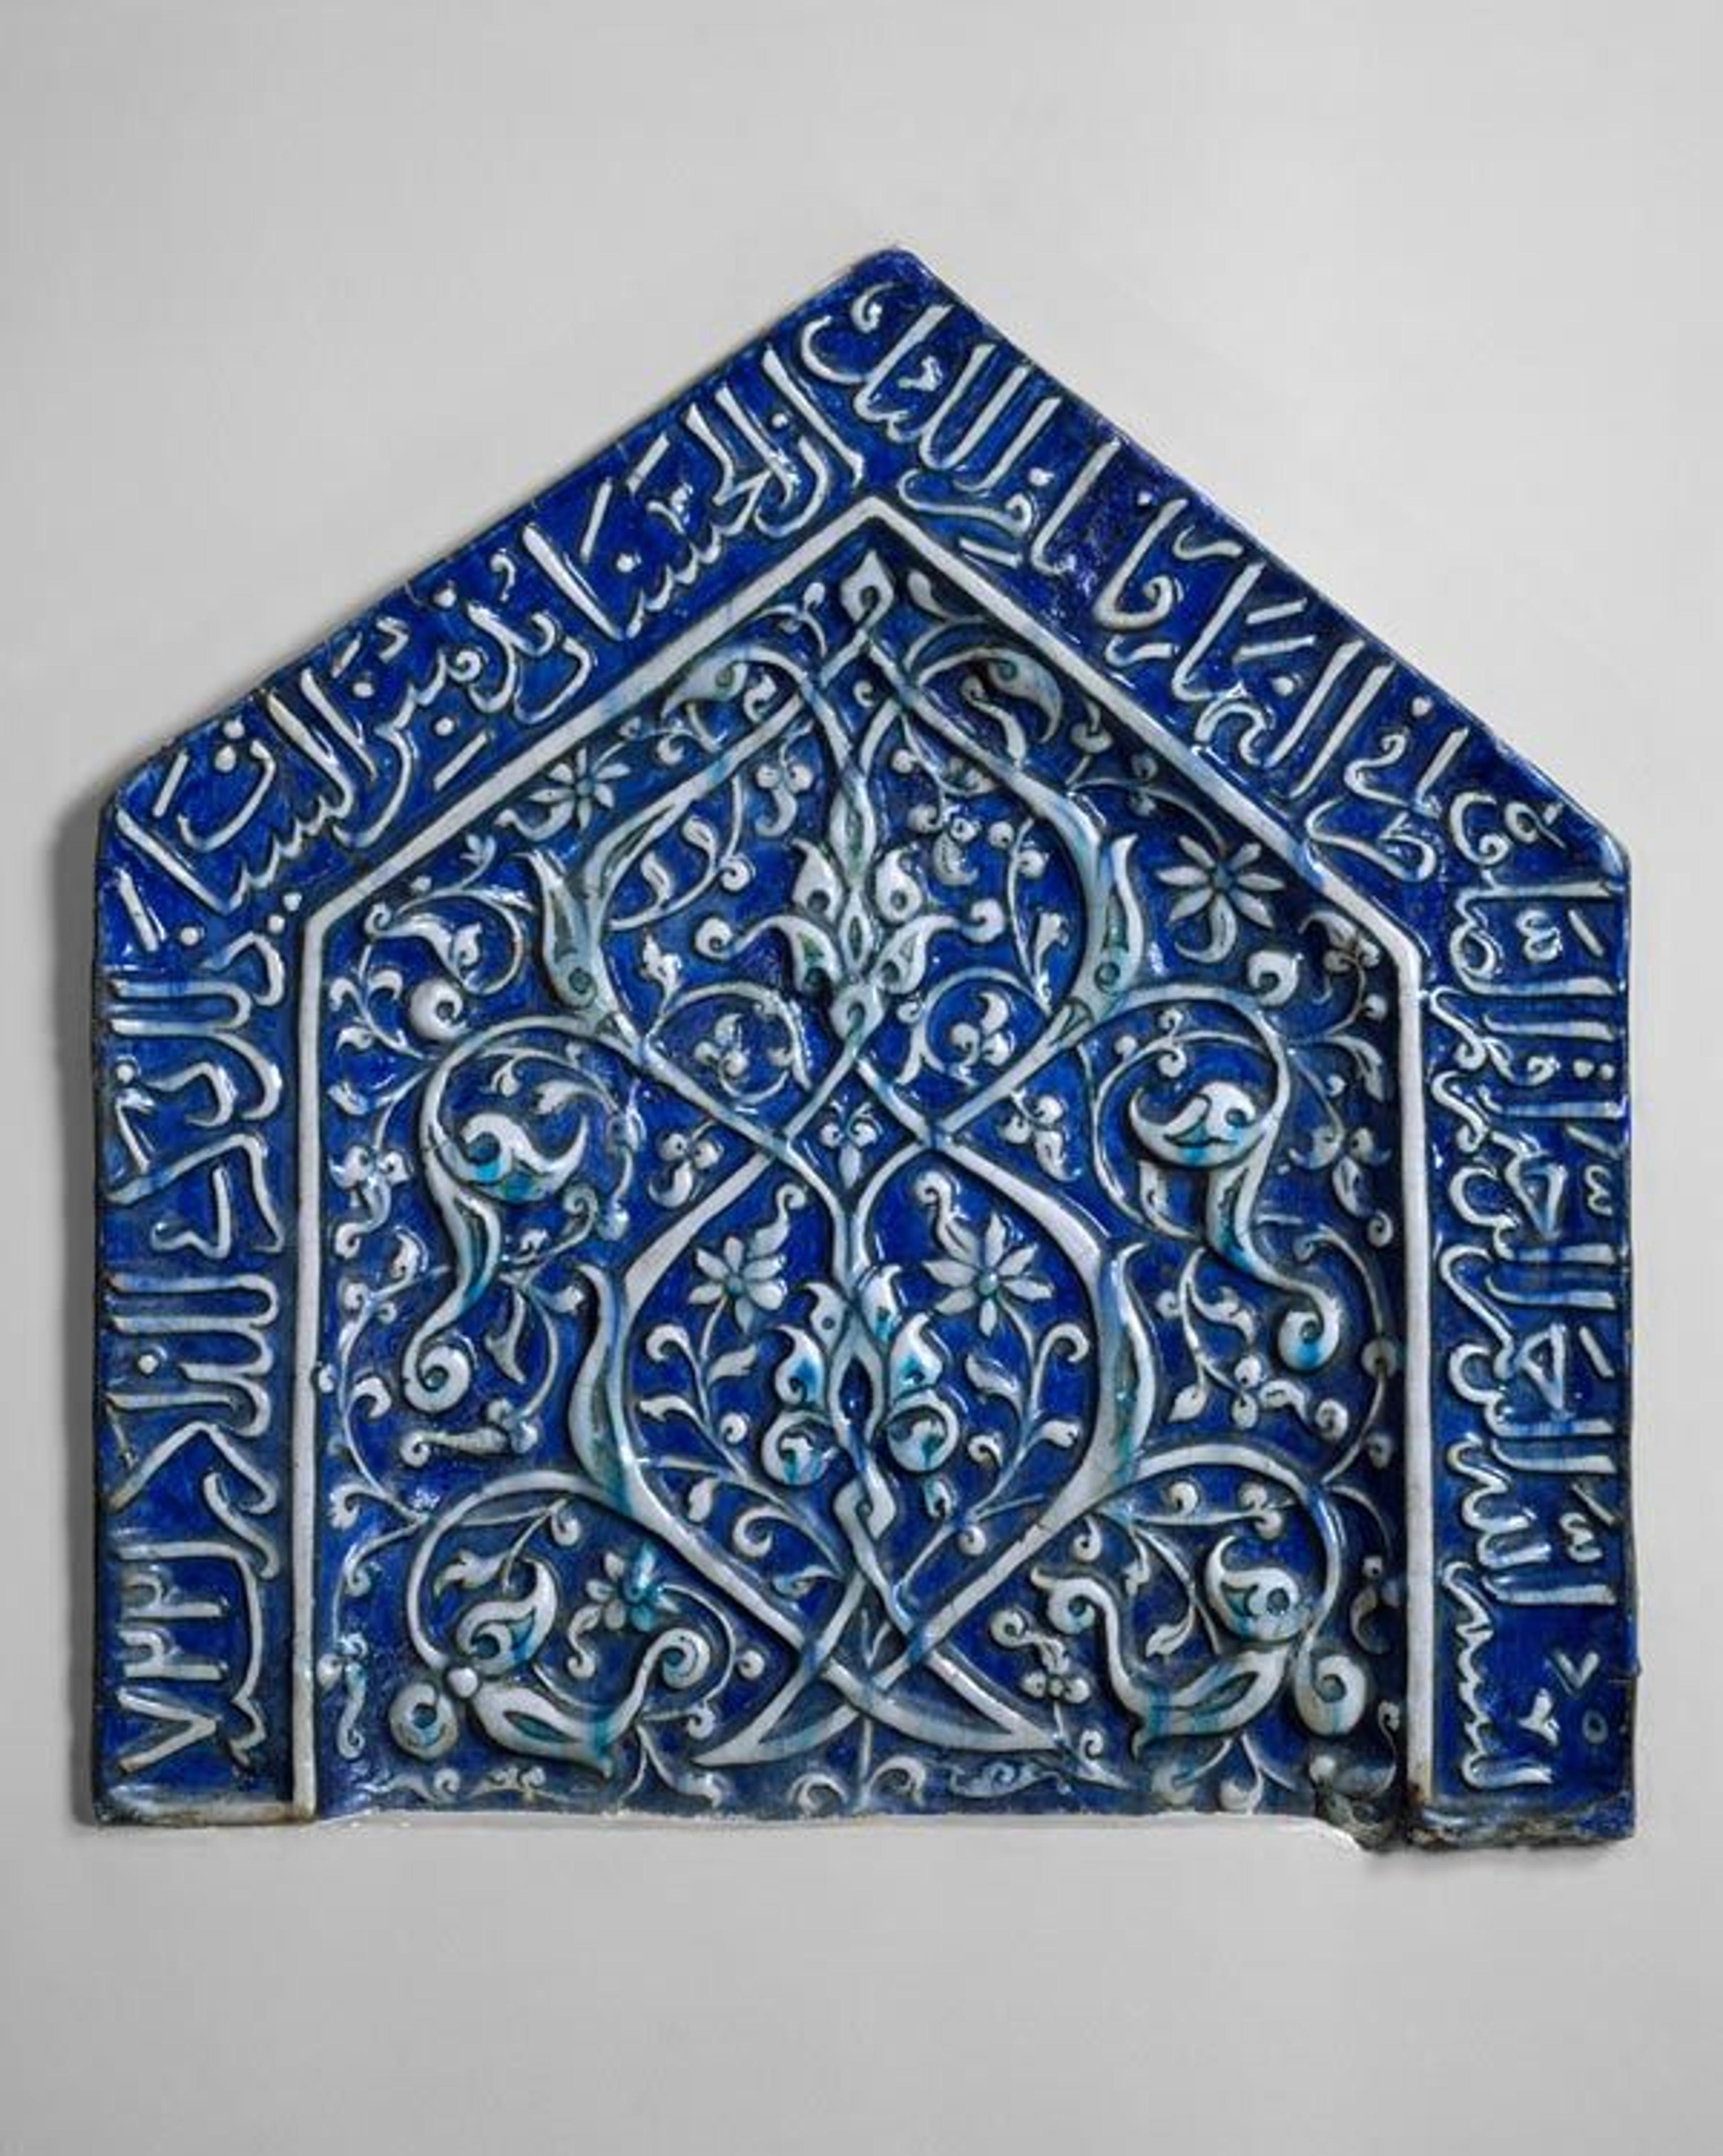 Mihrab Tile, dated A.H. 722/ A.D. 1322–23. Iran, Islamic. Stonepaste; modeled, painted under transparent glaze; H. 27 3/8 in. (69.5 cm) W. 26 in. (66 cm) Wt. 74 lbs. (33.6 kg). The Metropolitan Museum of Art, New York, Gift of William Mandel, 1983 (1983.345)